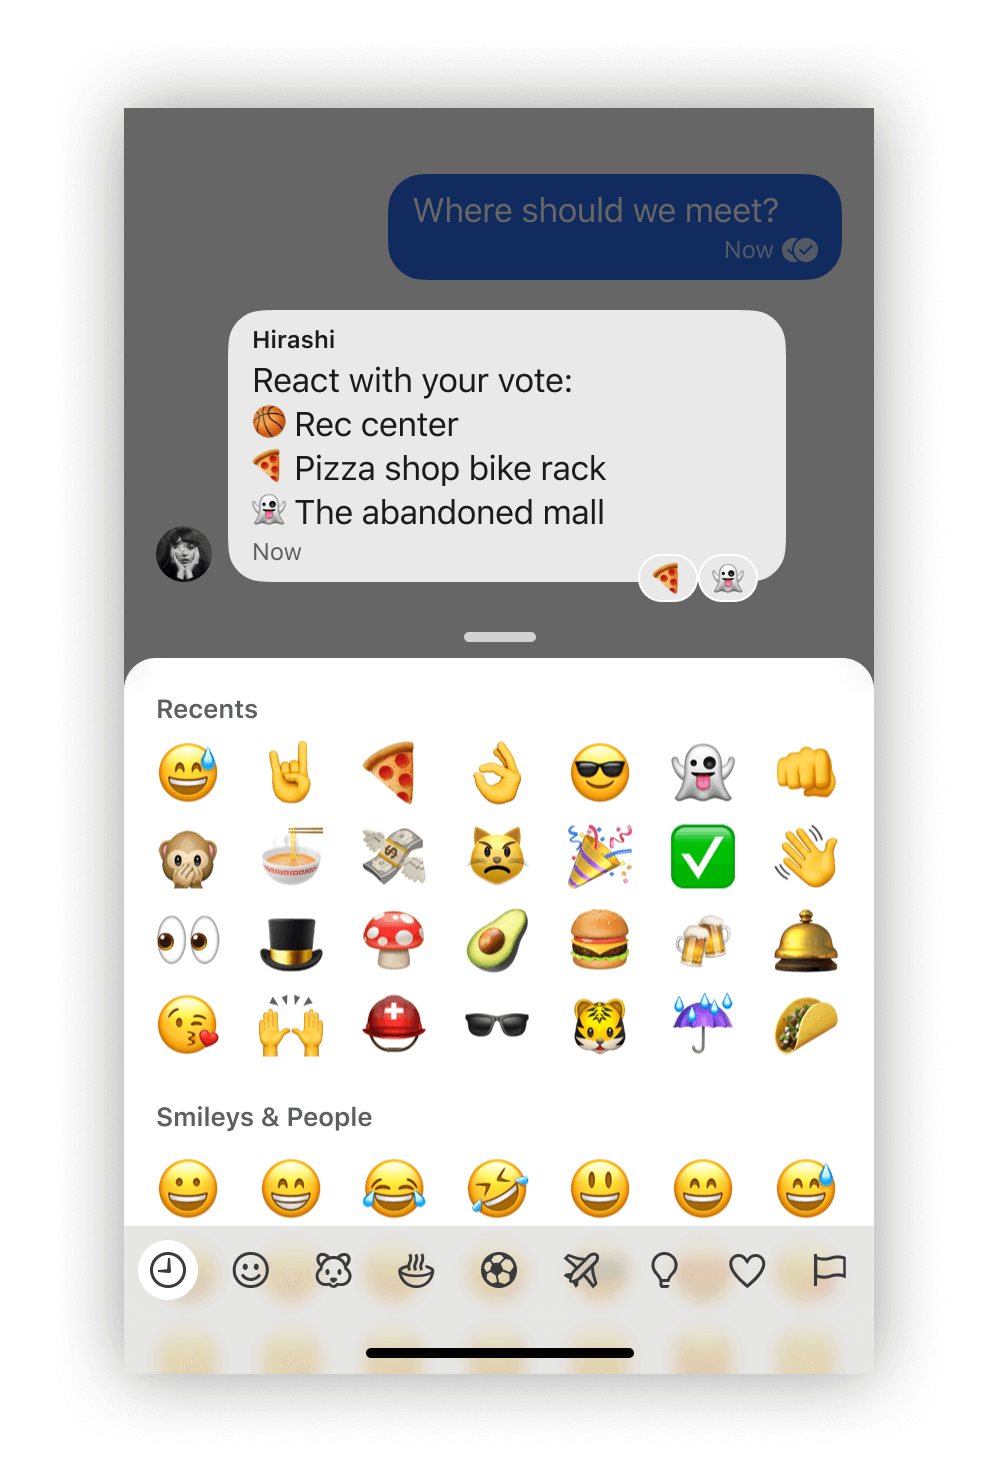 Screenshot of a poll conducted using custom emoji reactions with the following text: 'Person 1: Where should we meet? Person 2: React with your vote: (basketball emoji) Rec center (pizza emoji) Pizza shop bike rack (ghost emoji) The abandoned mall'